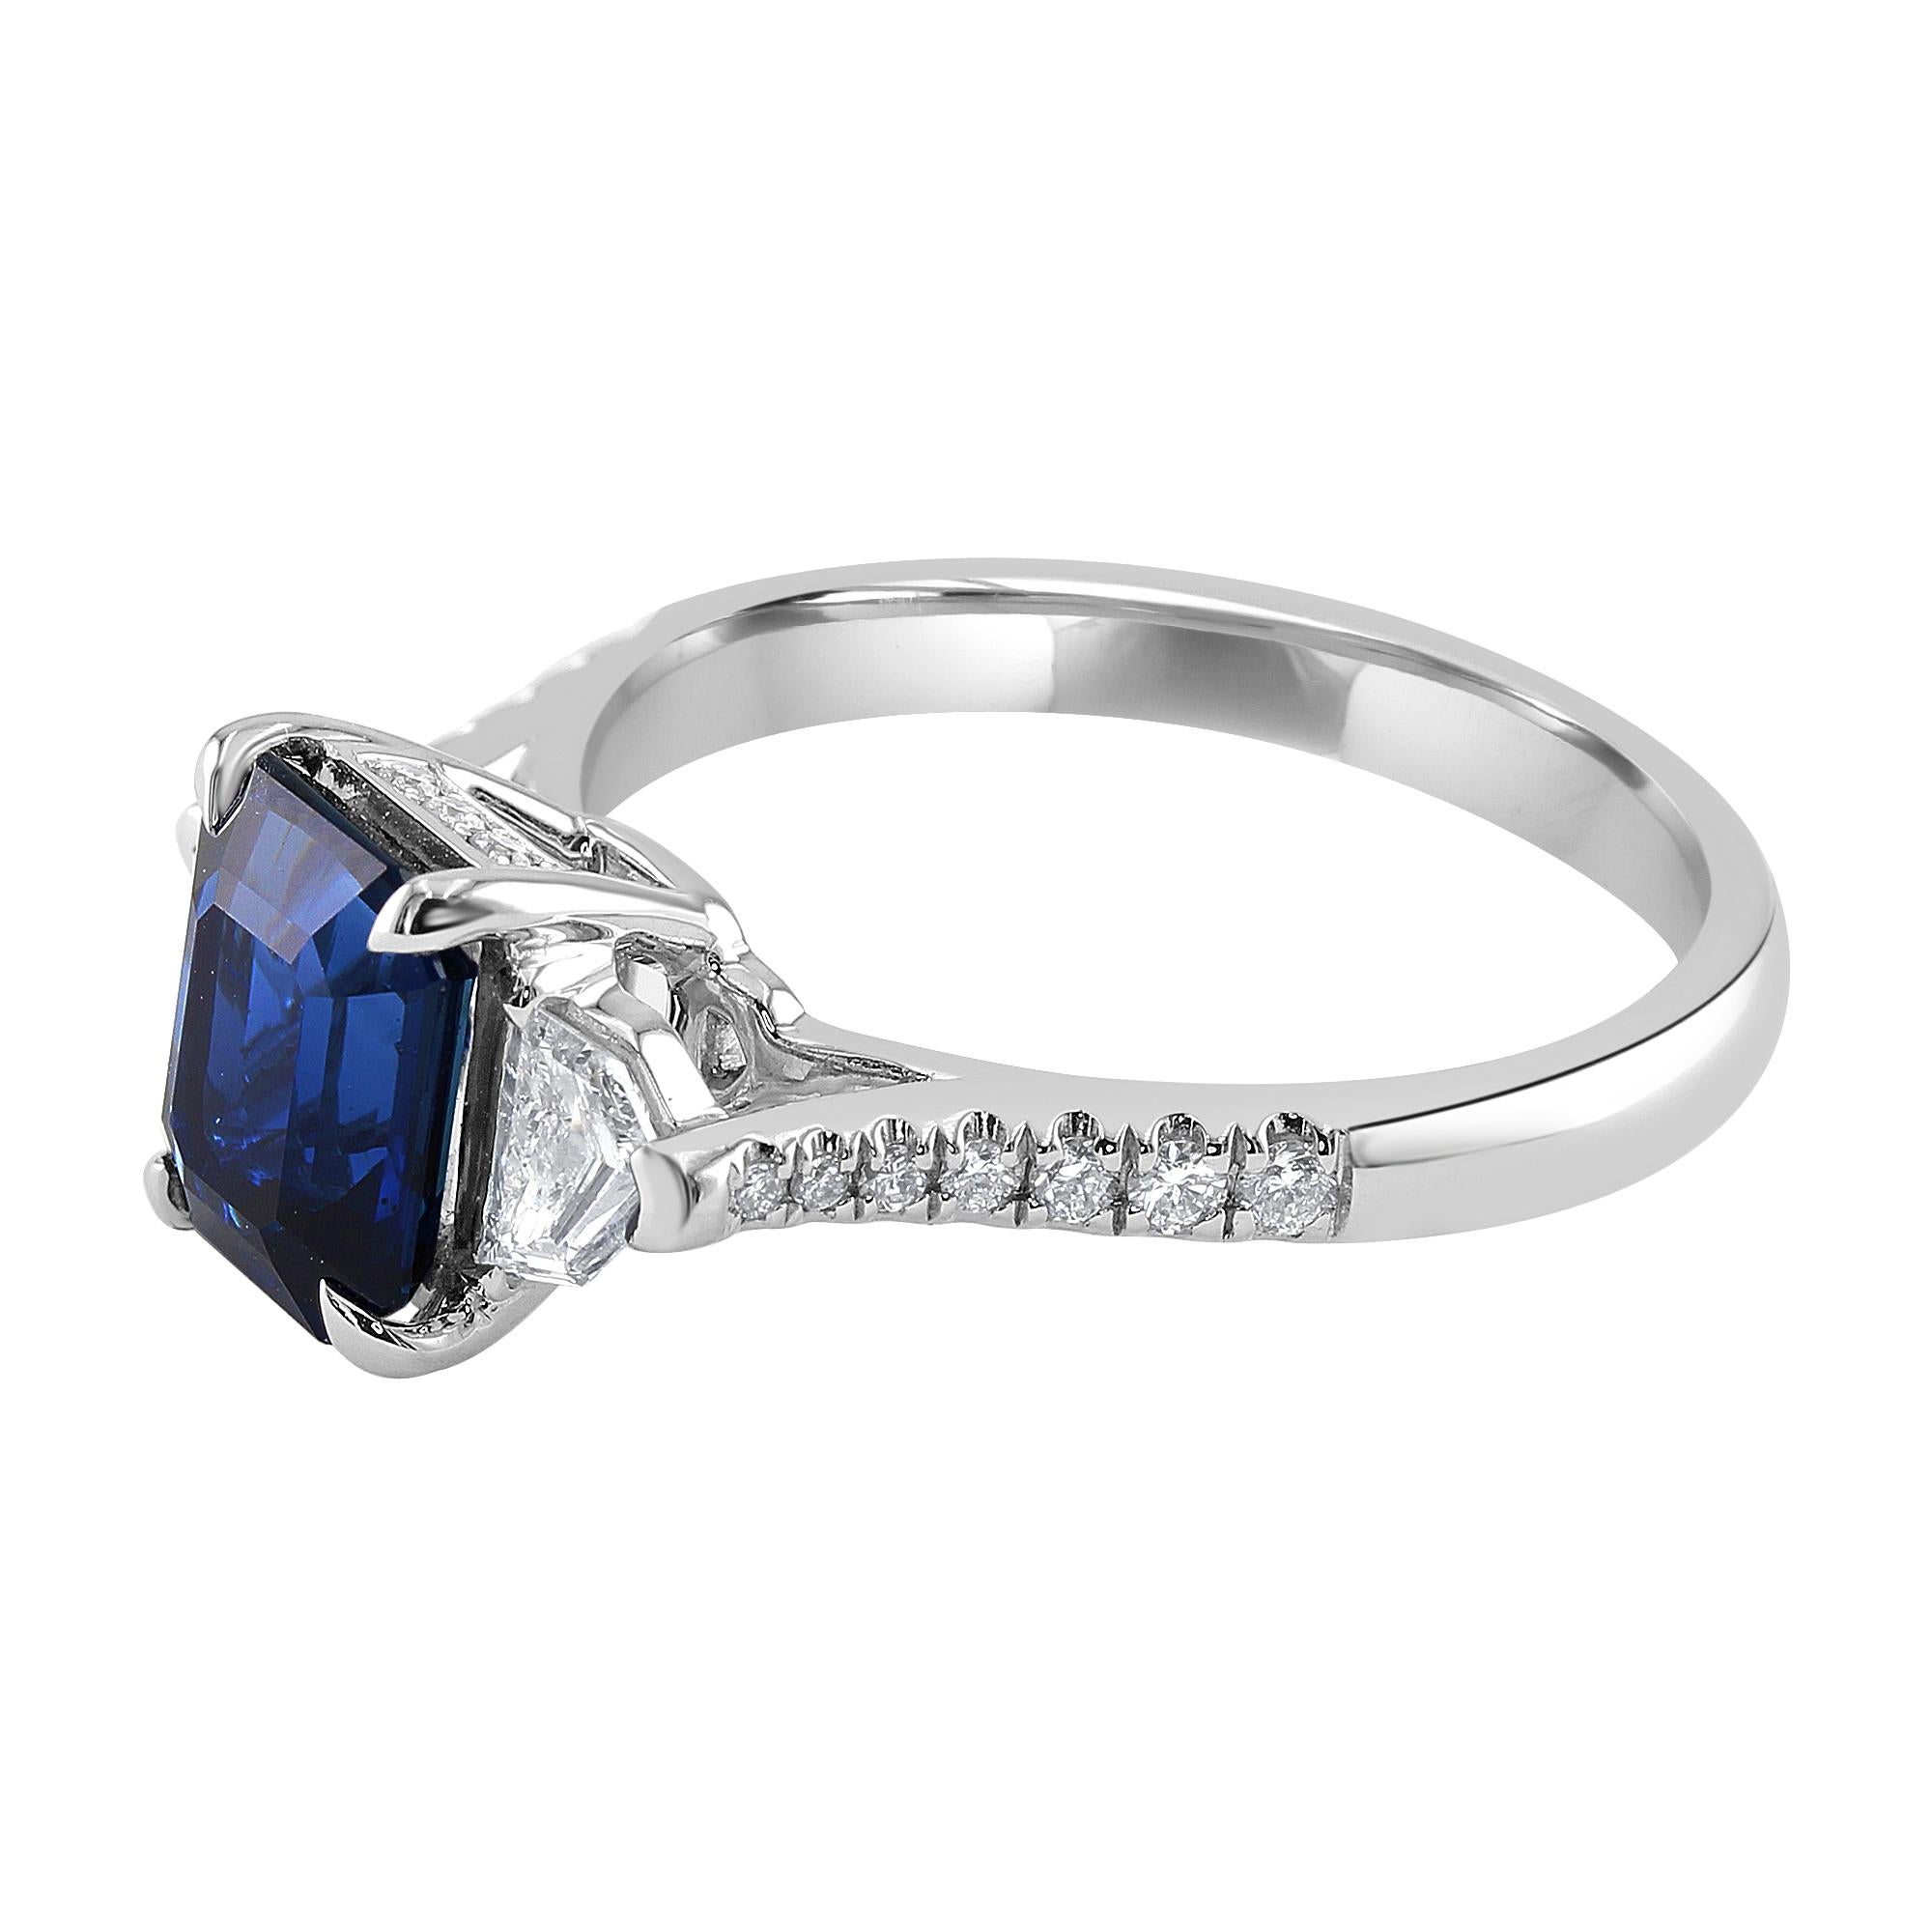 2.19 carat Emerald-cut Sapphire, set between two 0.28 carat epaulet diamonds.

Total weight round diamonds: 0.20 carat

Gorgeous one-of-a-kind blue sapphire engagement ring for a special lady looking for a unique look. This beauty may also be worn